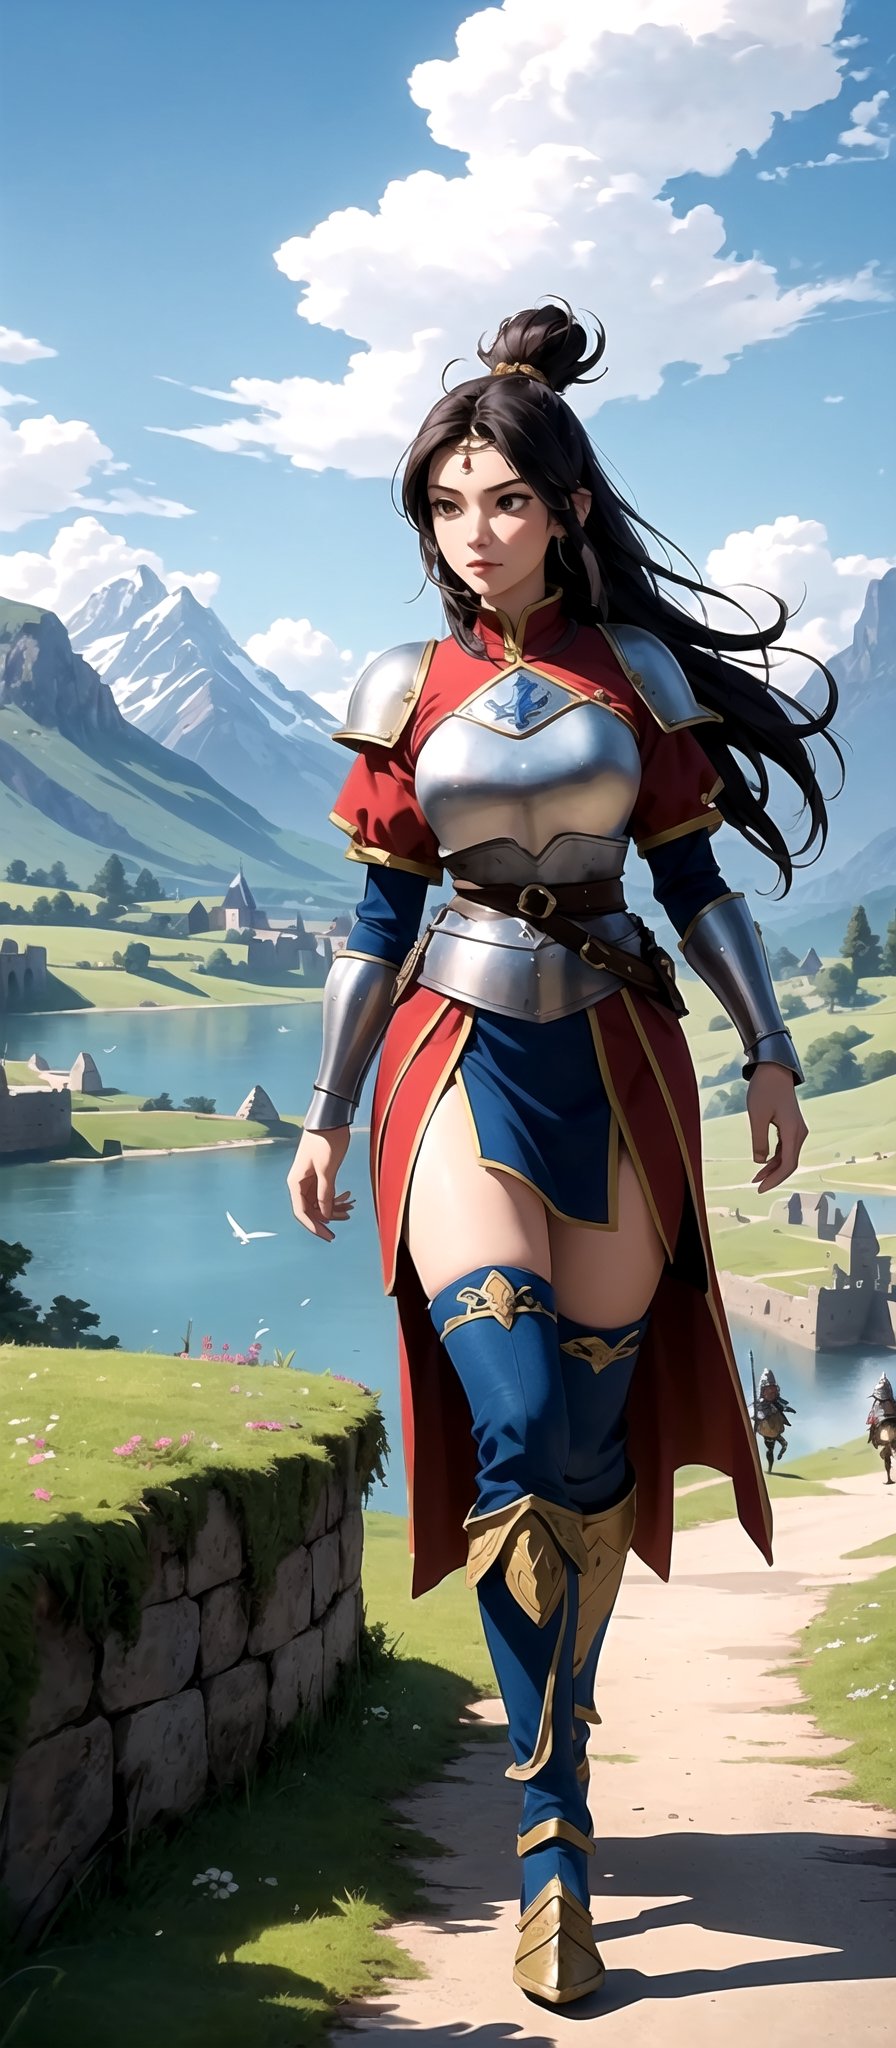 "Capture the essence of epic clashes and scenic beauty with this battle wallpaper, (((Picture a beautiful oung female warrior walking through a medieval battleground))). In the background, a majestic stone castle overlooks a tranquil lake, while sheep graze peacefully in a lush garden. Towering mountains frame the horizon under a picturesque sky. This scene, inspired by Age of Empires, combines the thrill of speed with the grandeur of medieval times, creating a truly captivating wallpaper for your phone."
 